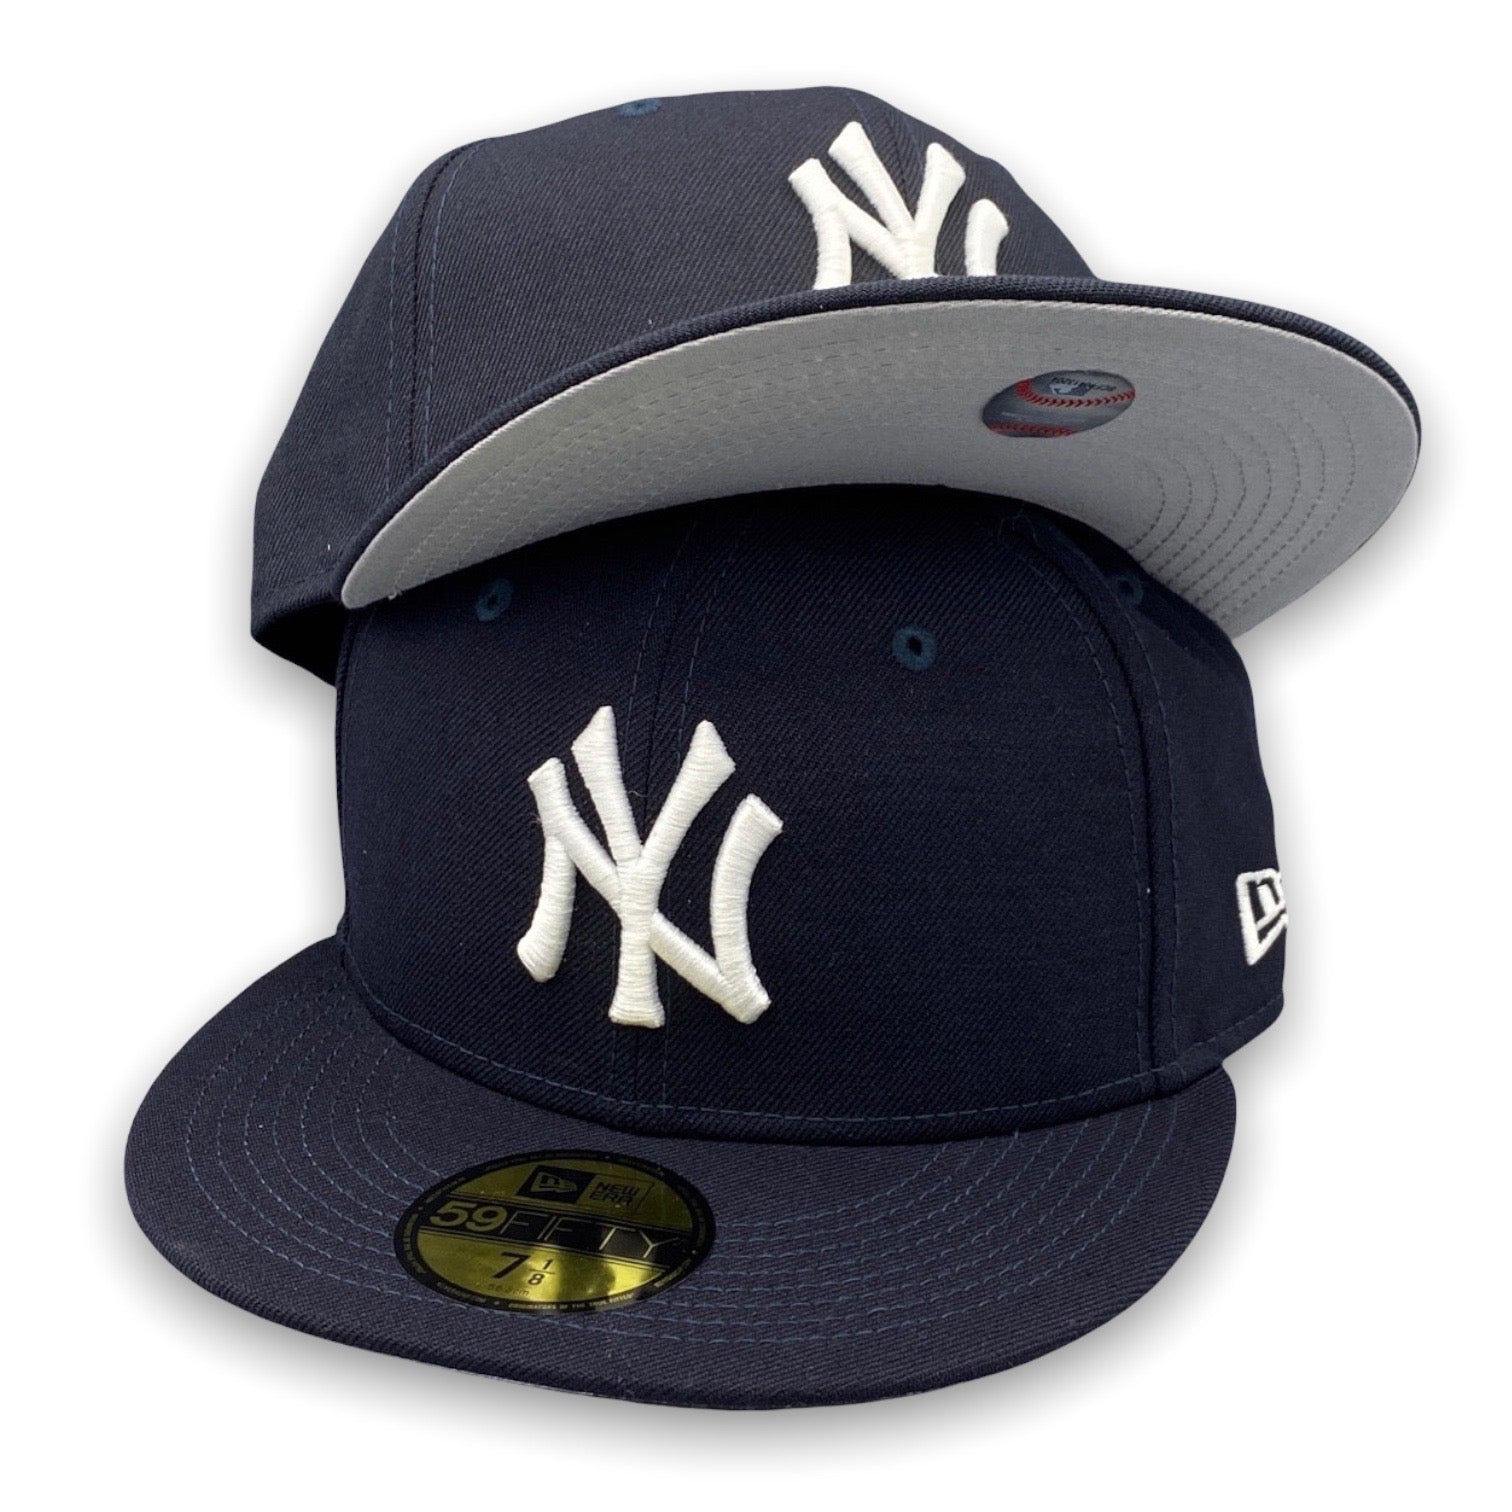 New York Yankees Basic Hat KING Flag USA Era CAP 59FIFTY – New Navy Fitted